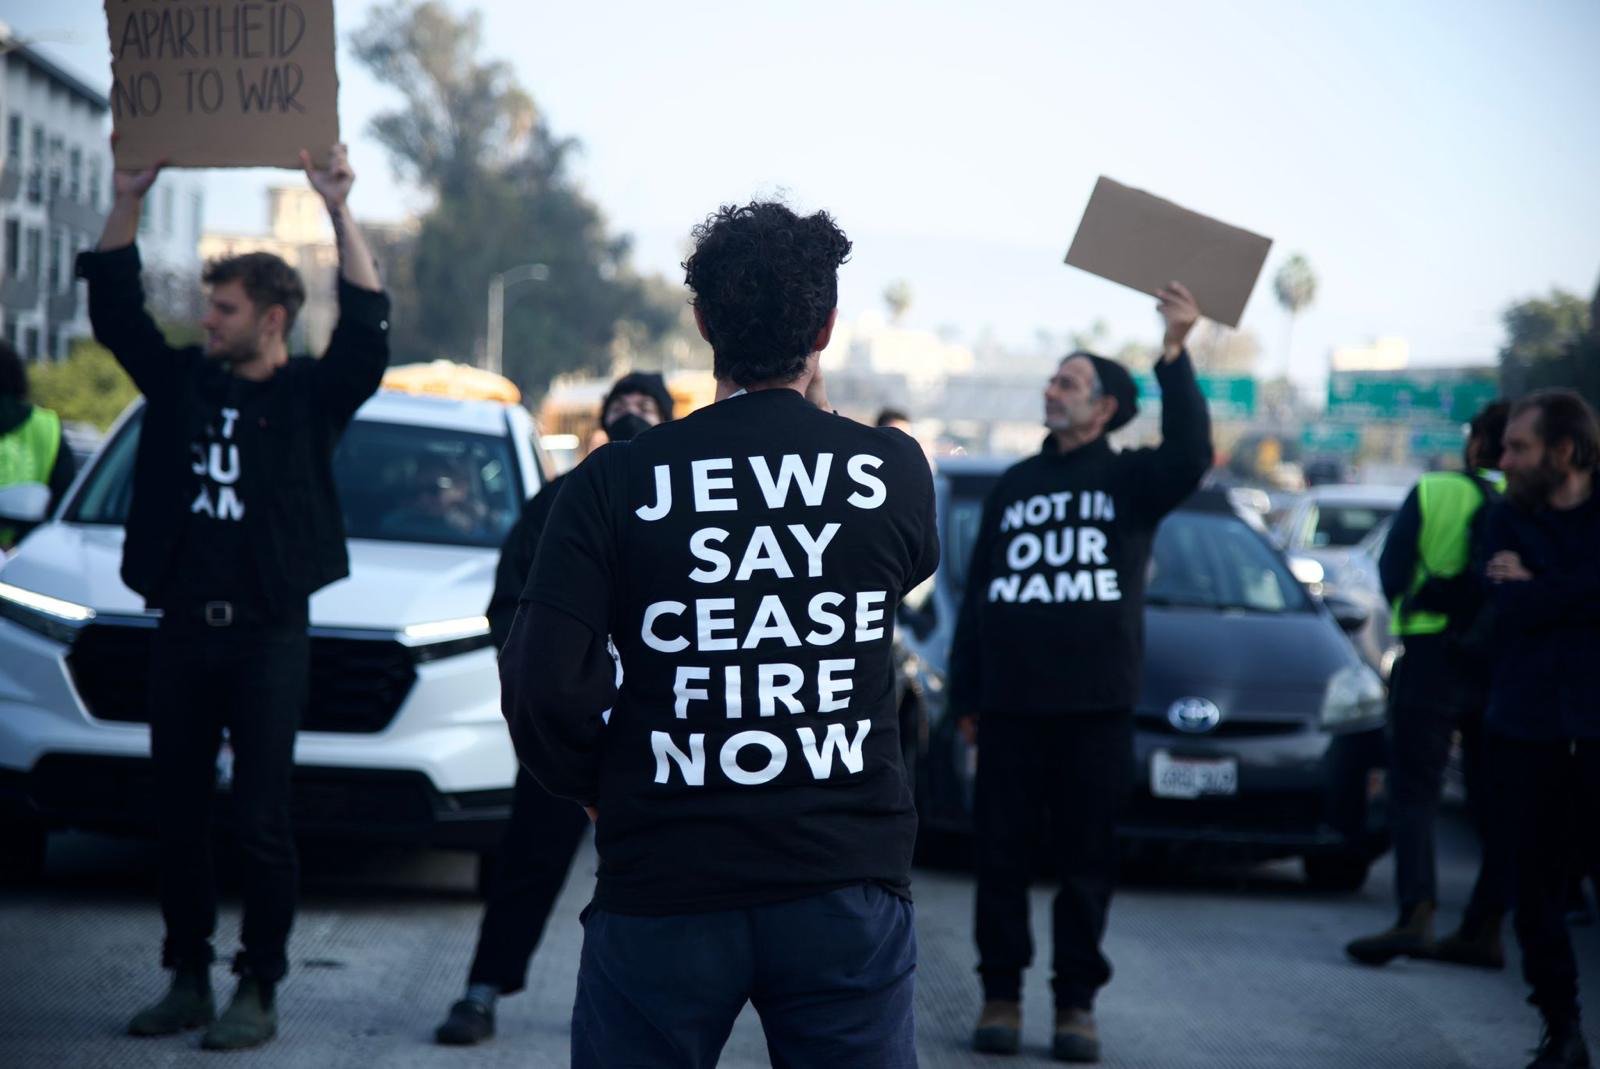 3 people are standing, blocking a line of traffic. They are wearing black t-shirts that say "Jews say ceasefire now" in white writing on the back, and "not in our name" on the front. In the background you can see skyscrapers, freeway signs, and a long line of cars.